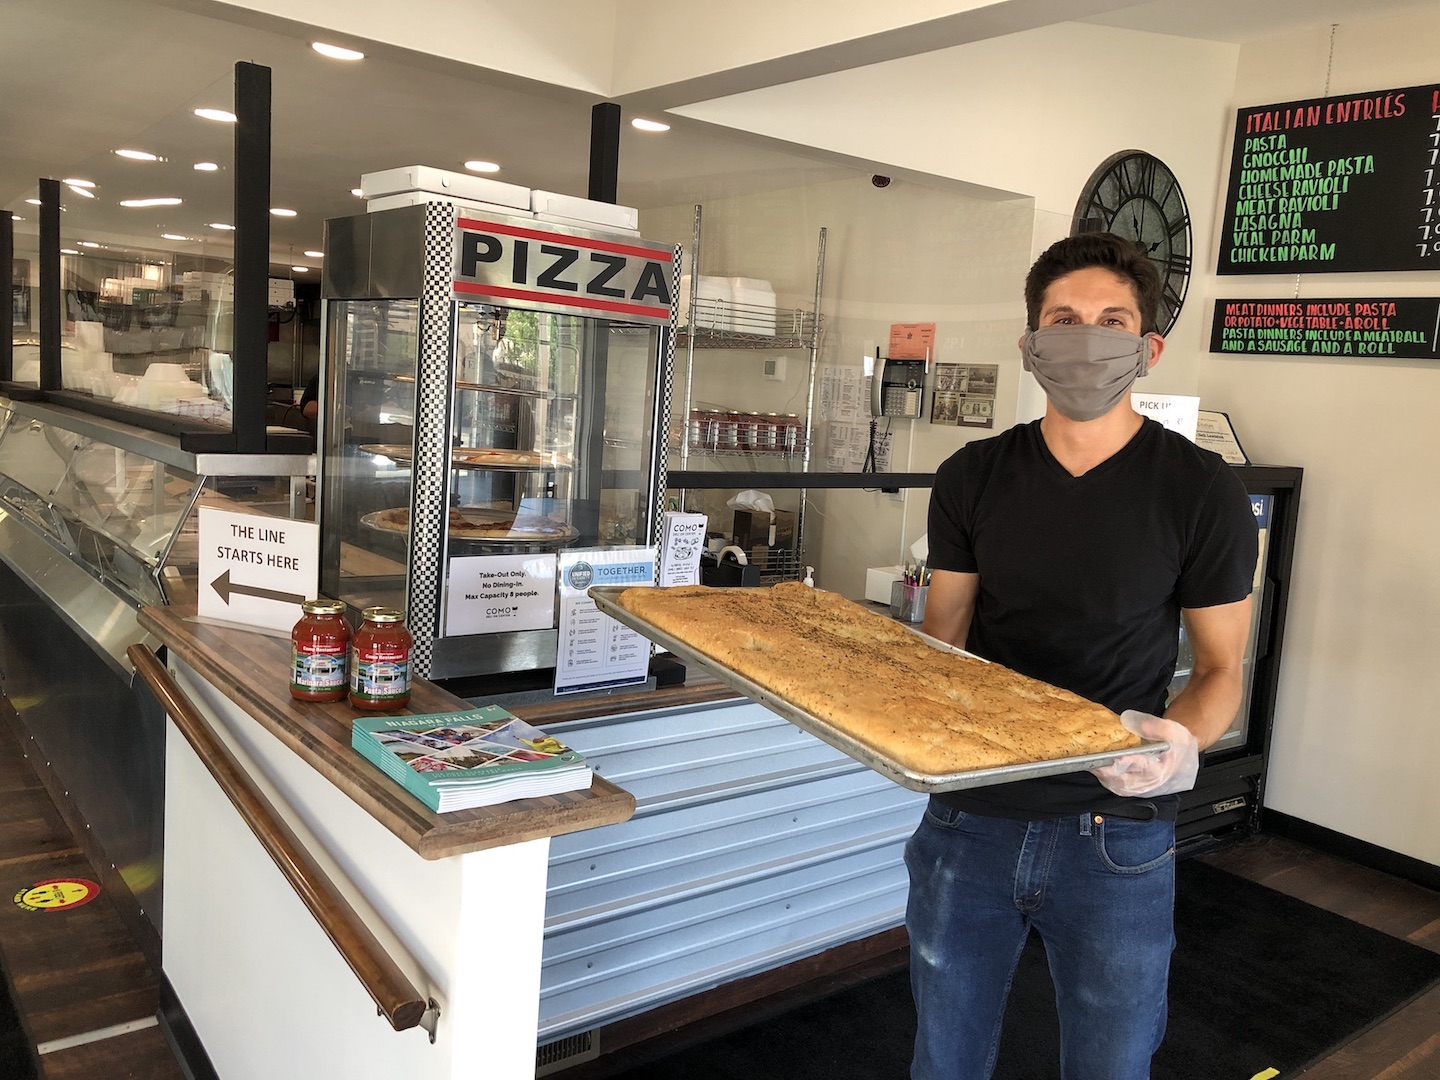 Dominic Colucci III (`Dom Jr.`) shows off a tray of the Como Deli's signature pizza bread. Around him are some of the new safety measures in place at the Lewiston eatery.